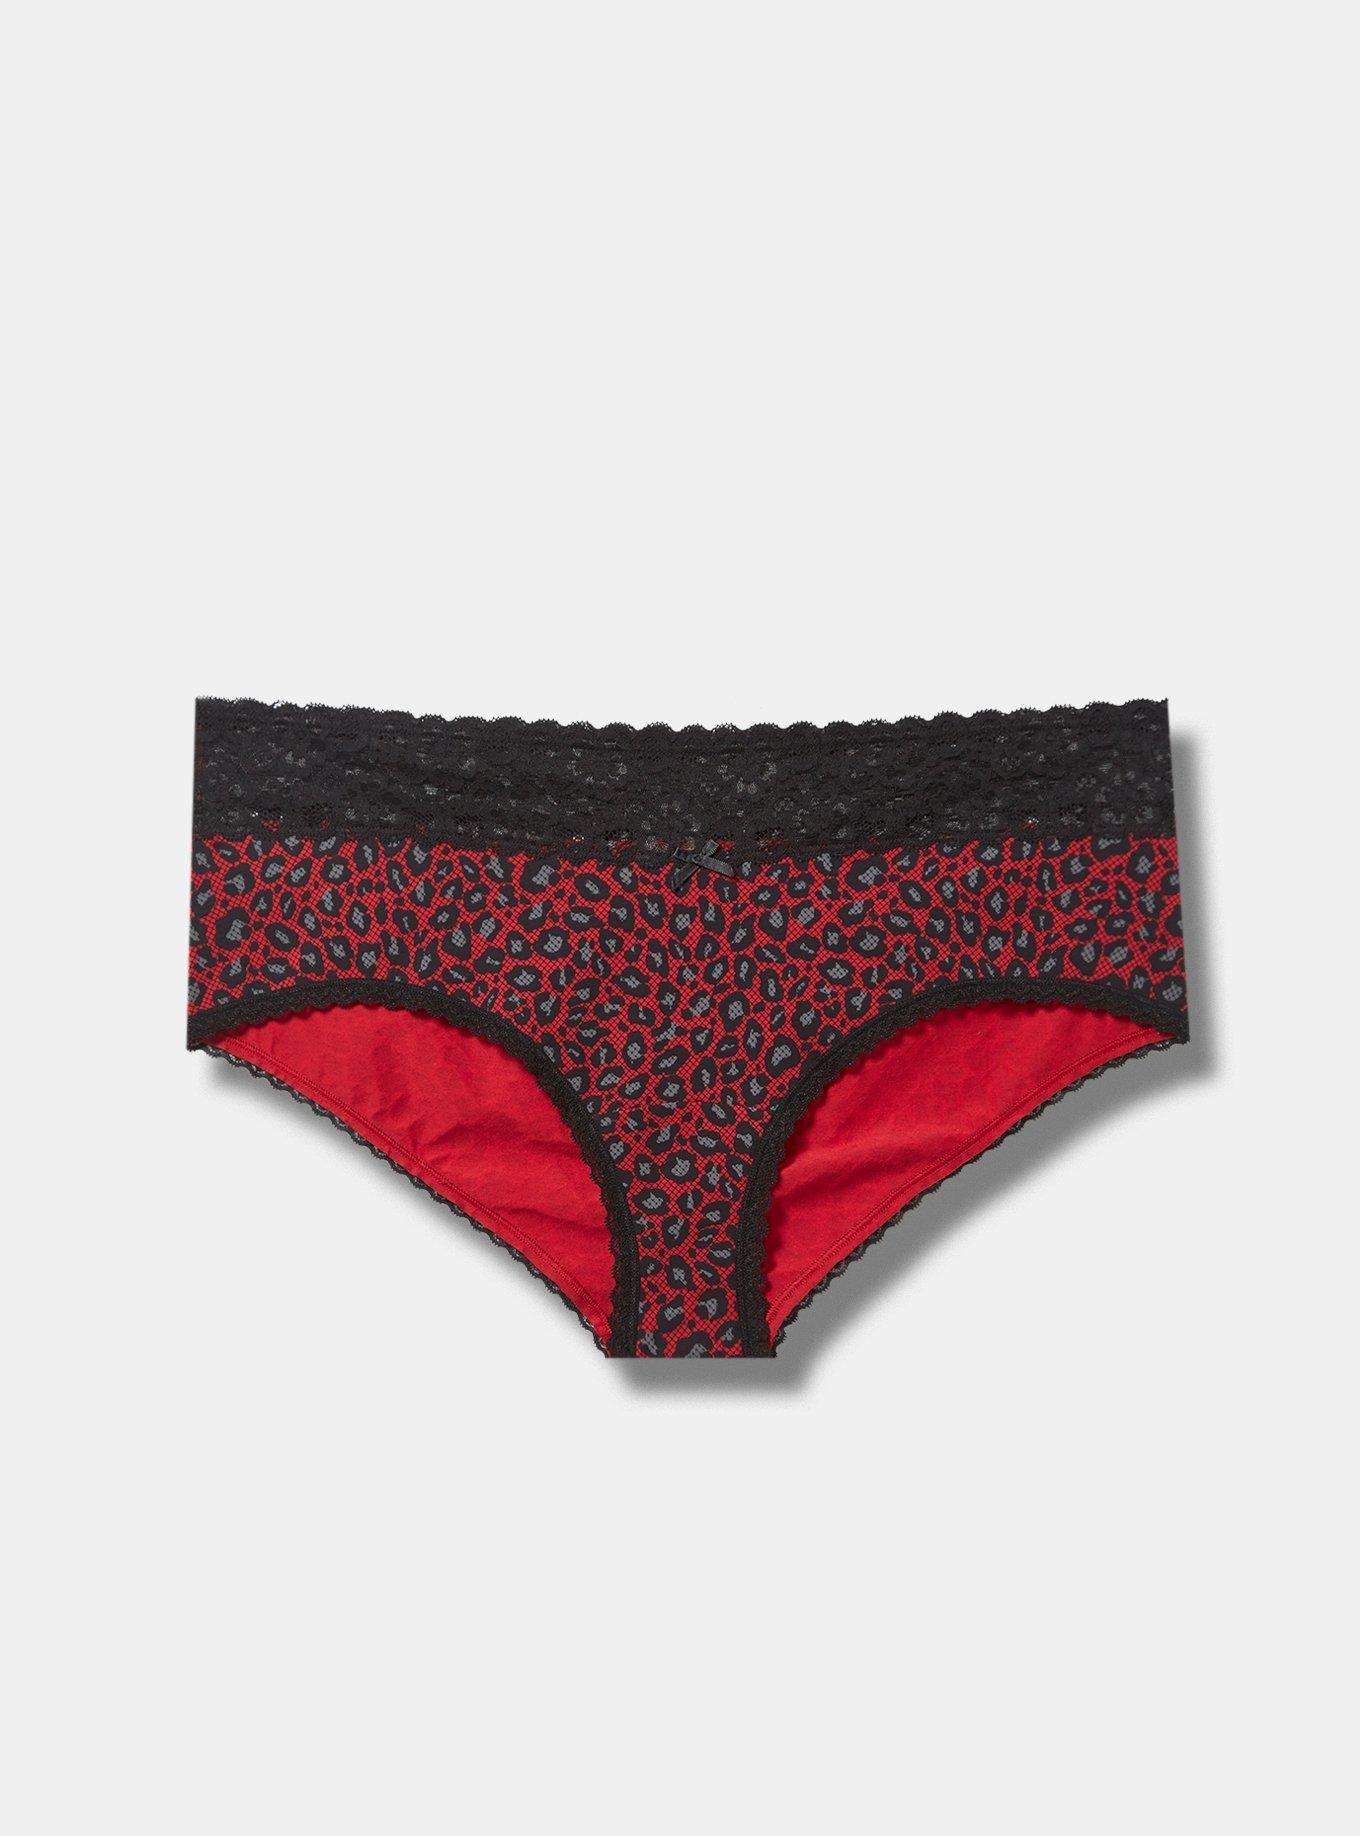 Cotton and Lace Band Cheeky Panty - Ditsy heart